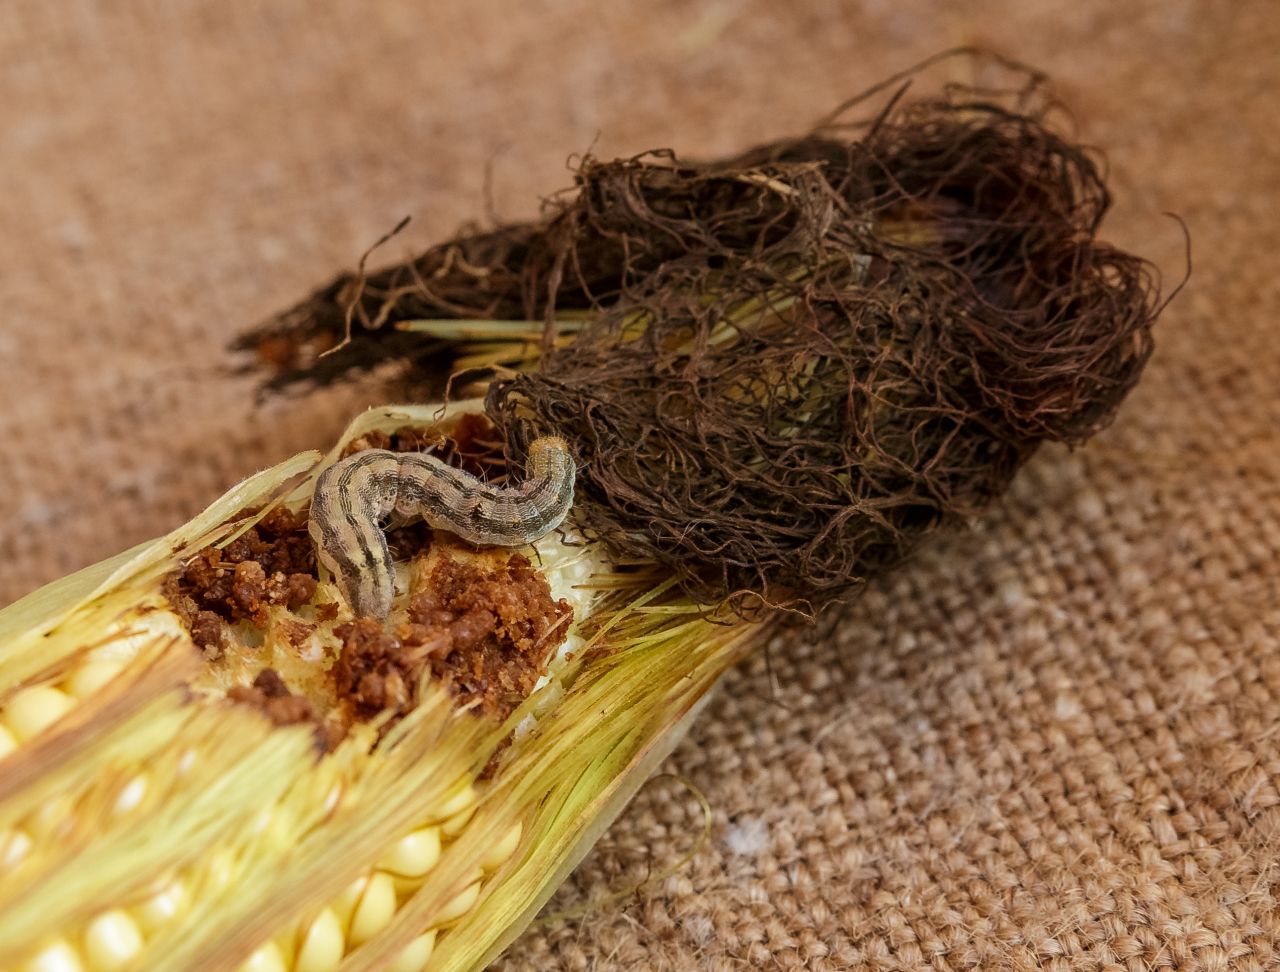 The canned sweet corn we love is allowed to have two or more larvae of the corn ear worm, along with larvae fragments and the skins the worms discard as they grow.